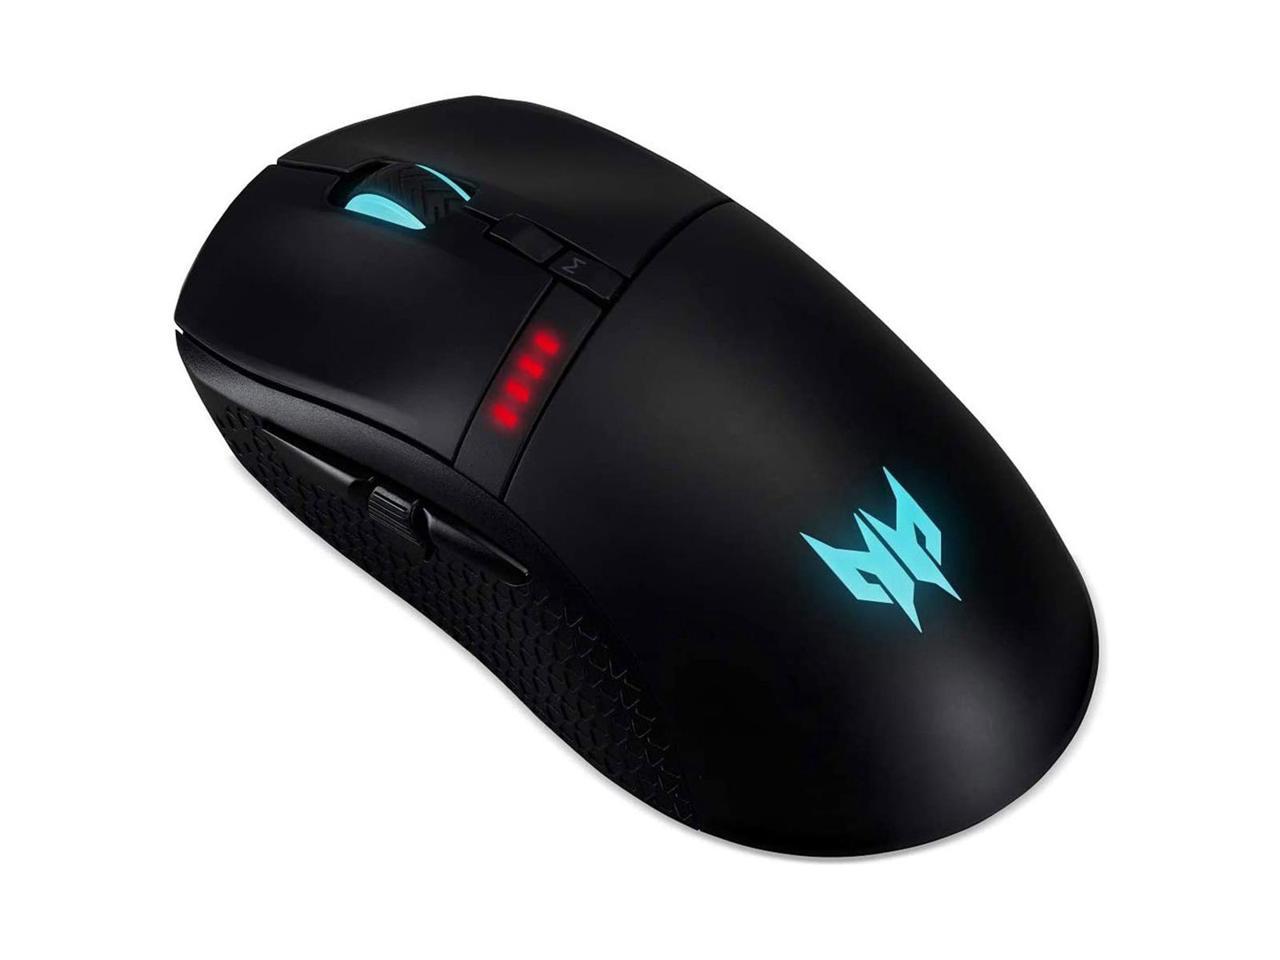 Acer Predator Cestus 350 Wired Gaming Mouse, Black #GP.MCE11.00Q - image 4 of 10